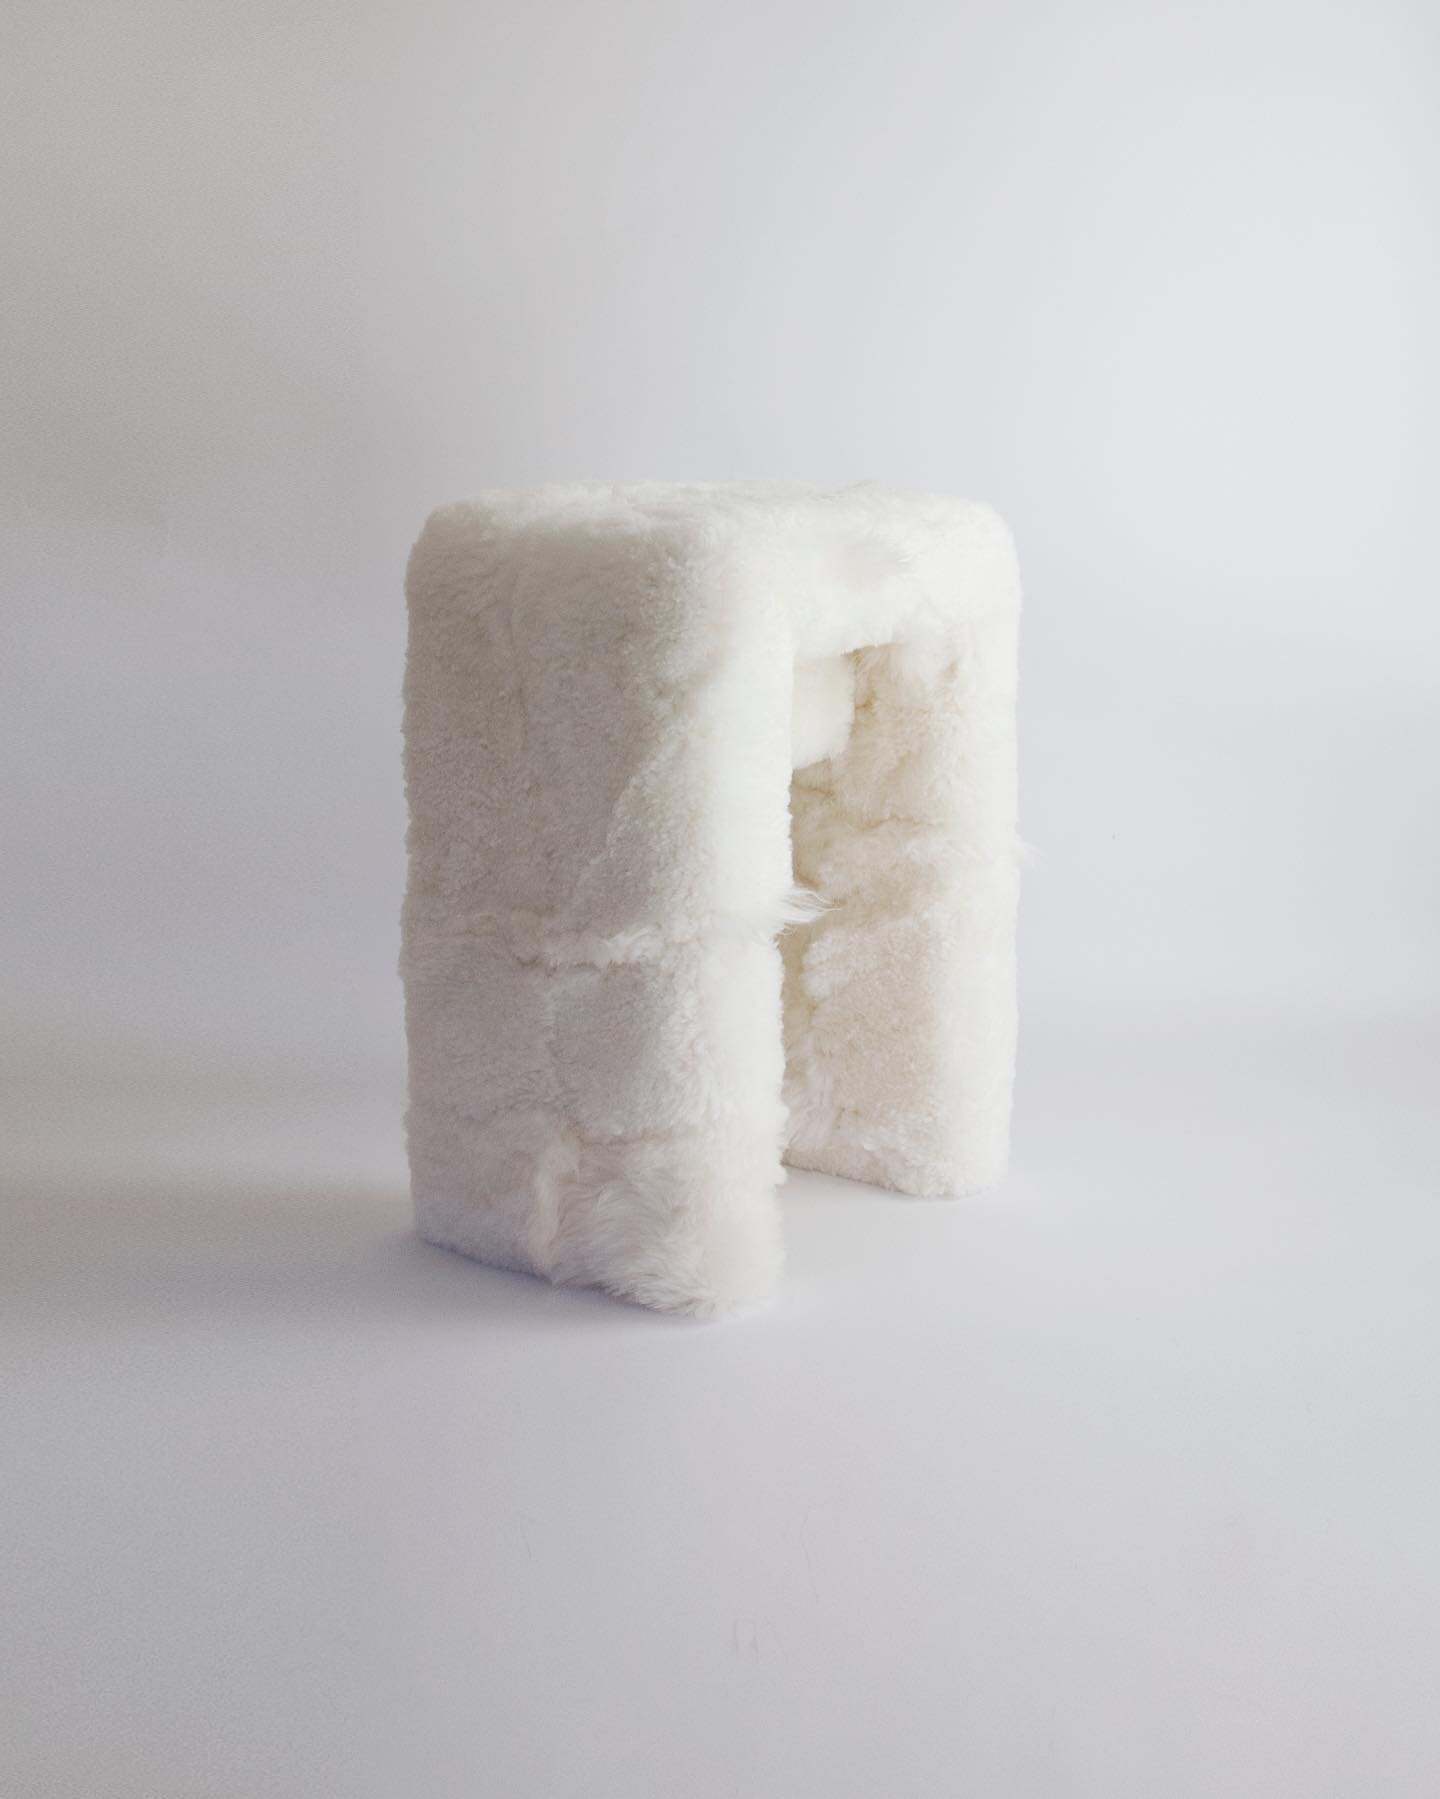 Reclaimed sheepskin table stool in the softest white fluff ☁️☁️☁️
.
.
.
.
#contemporaryfurniture #slowmade #sustainability #craft #objectdesign
#newmakers  #artoninstagram #emergingartists  #itsnicethat #sayhito_submit #interiortrend